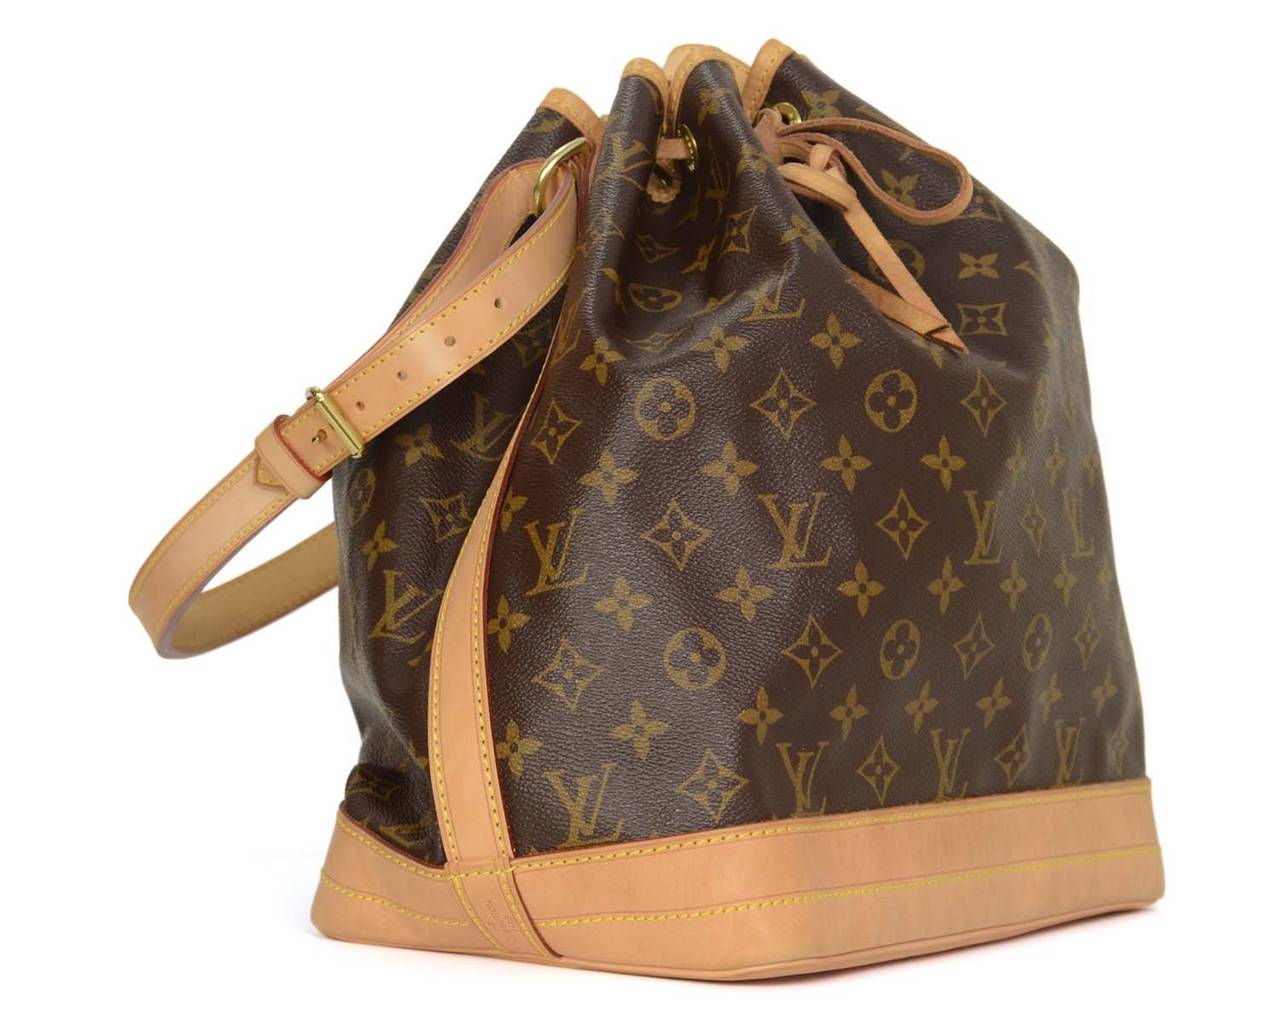 Louis Vuitton Monogram Canvas Noe Drawstring Bag
Features adjustable shoulder strap
Made in: France
Year of Production: 2011
Color: Brown, tan and goldtone
Hardware: Goldtone
Materials: Coated canvas, leather and metal
Lining: Brown